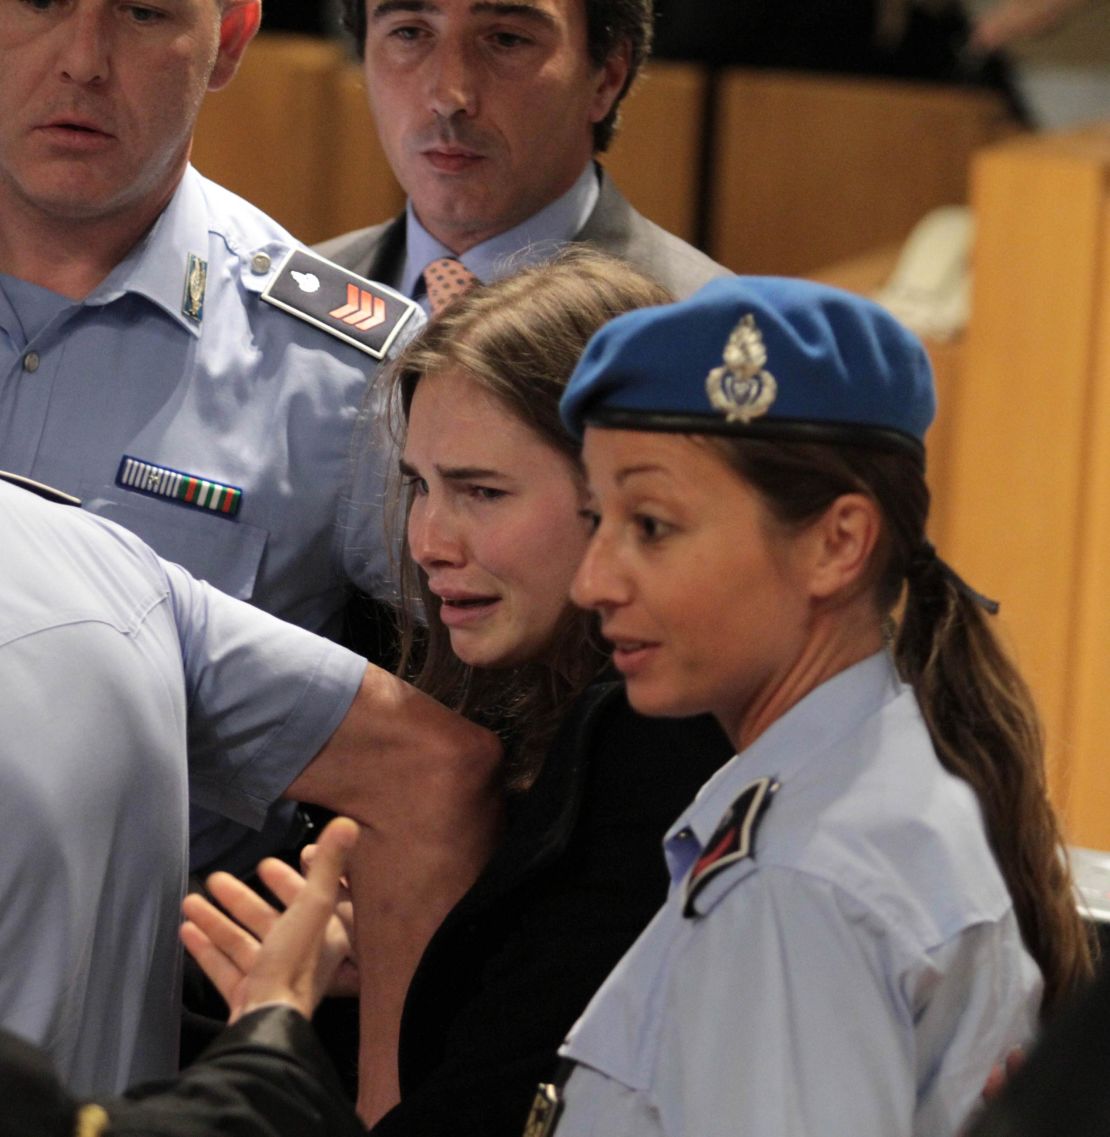 Knox breaks into tears as she leaves the court after being acquitted on October 3, 2011, for Kercher's murder.